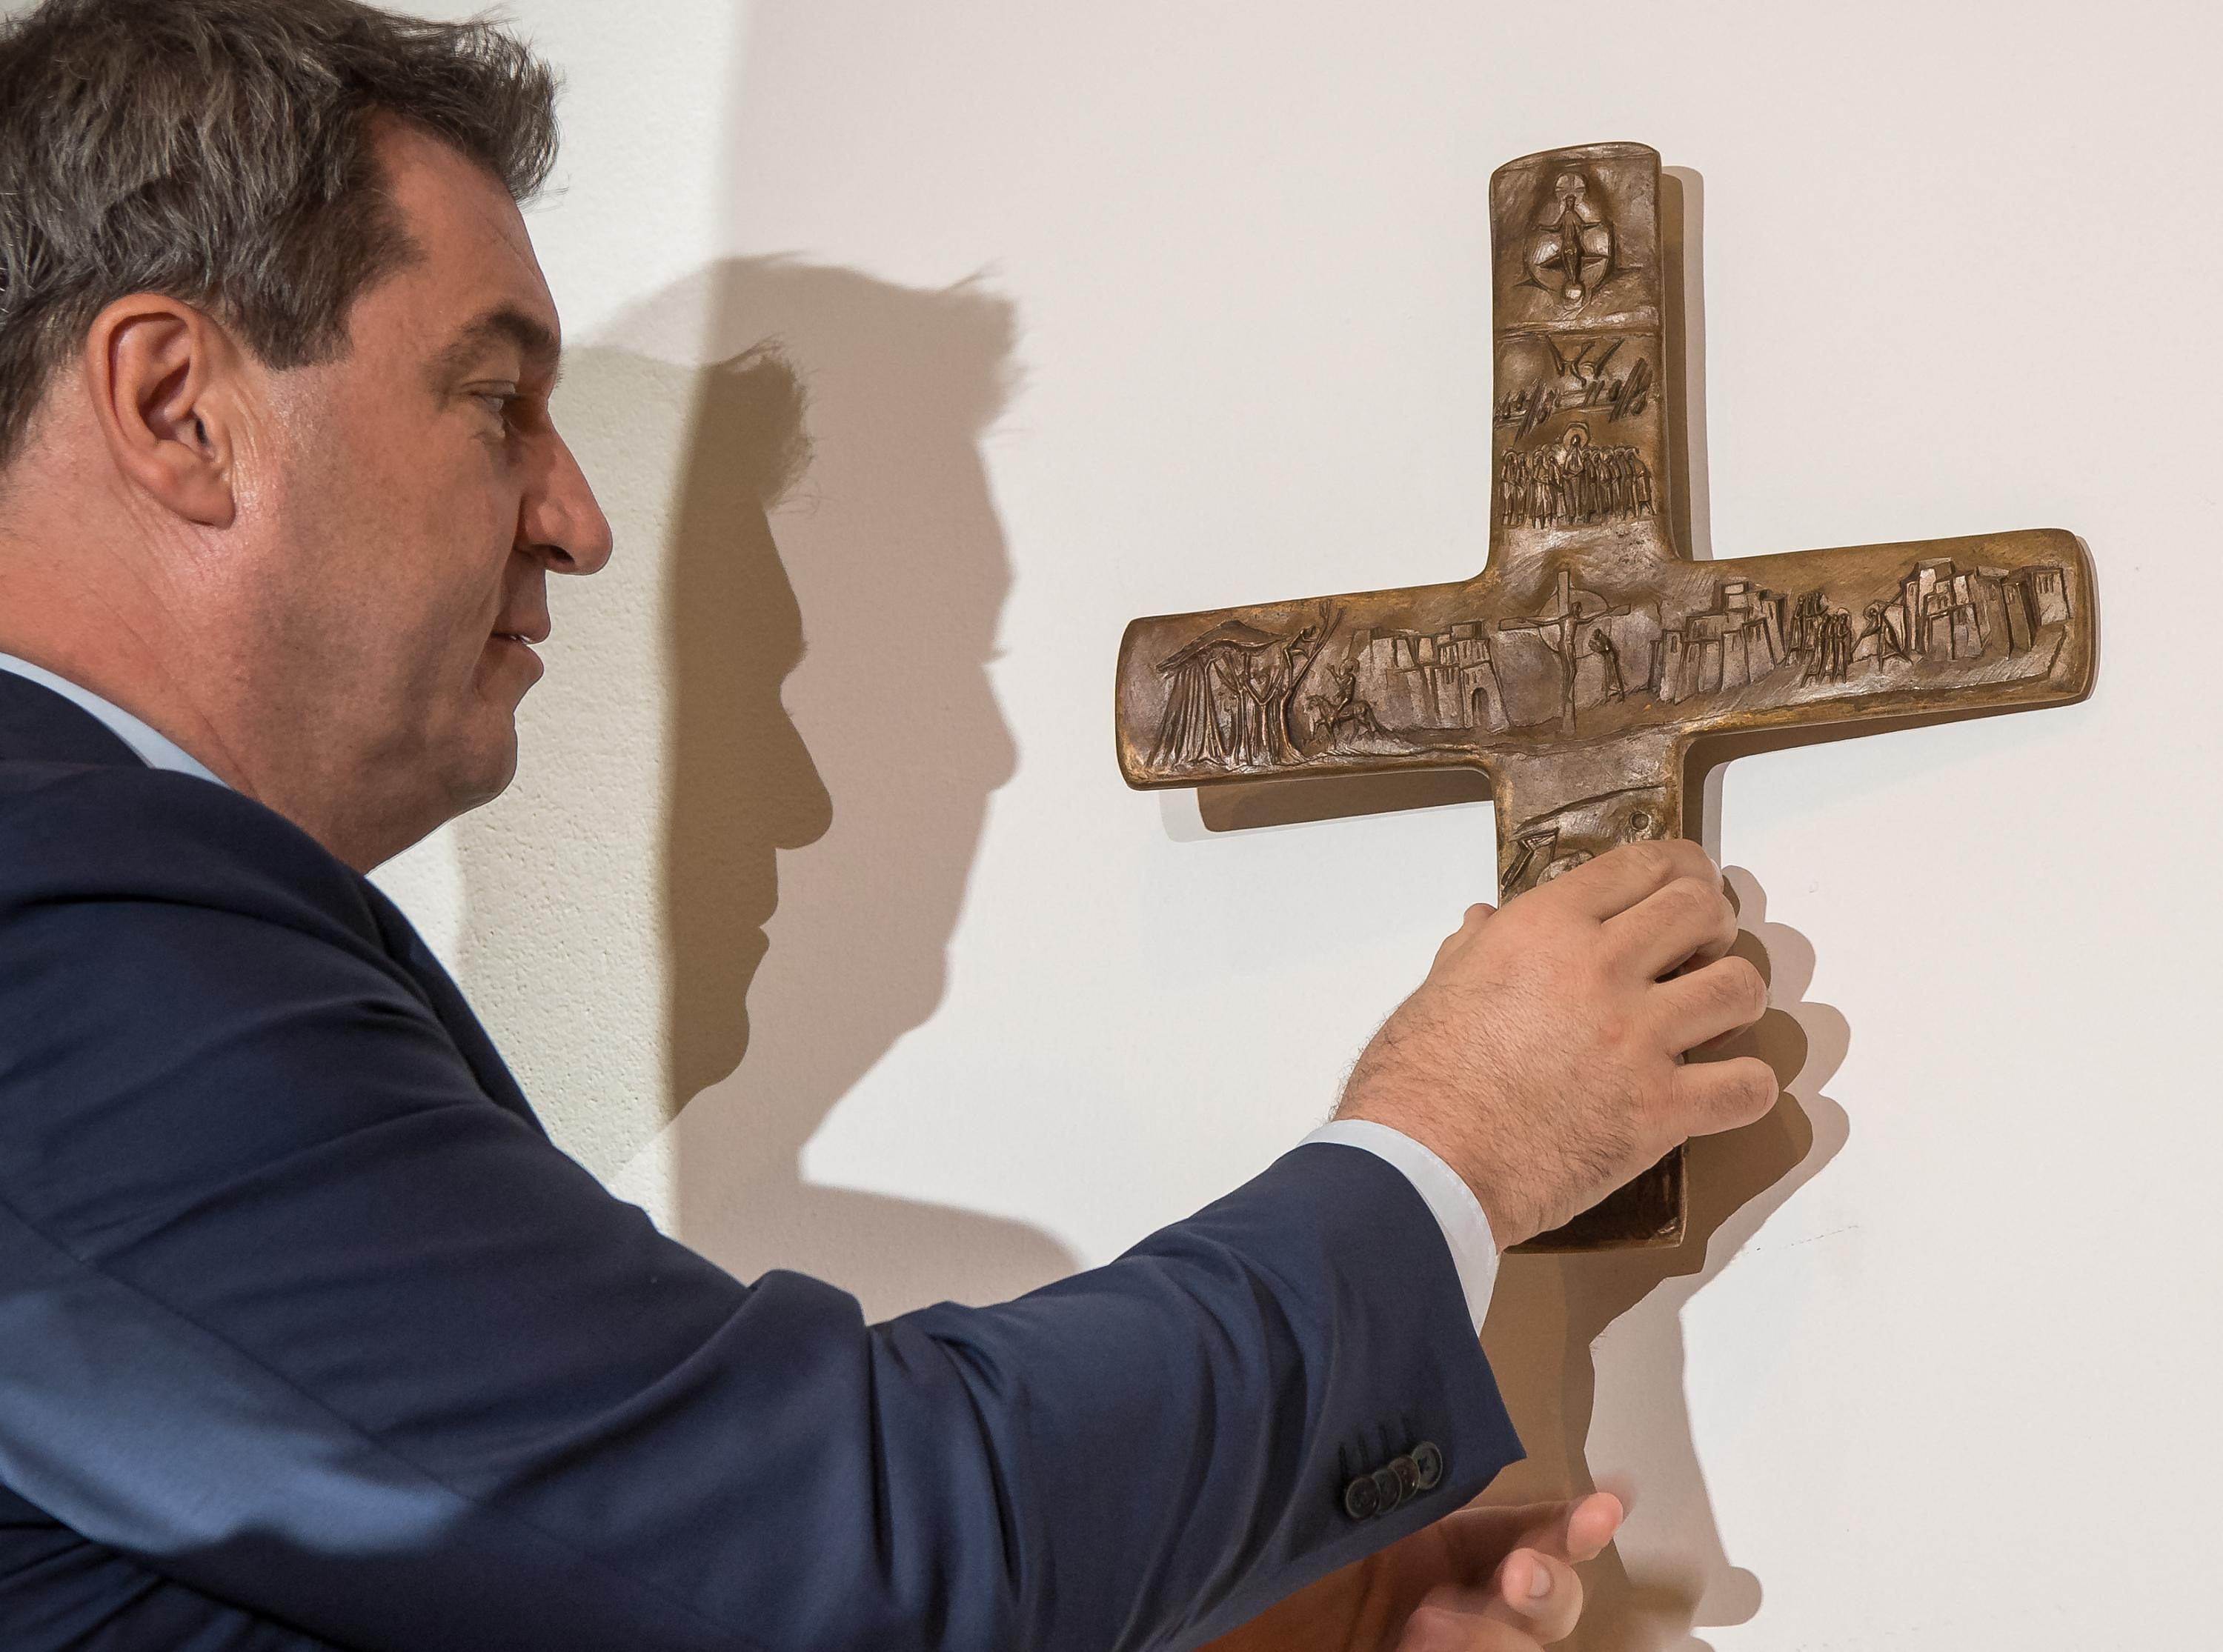 In Germany, secularism does not prohibit crucifixes on public buildings, judges say